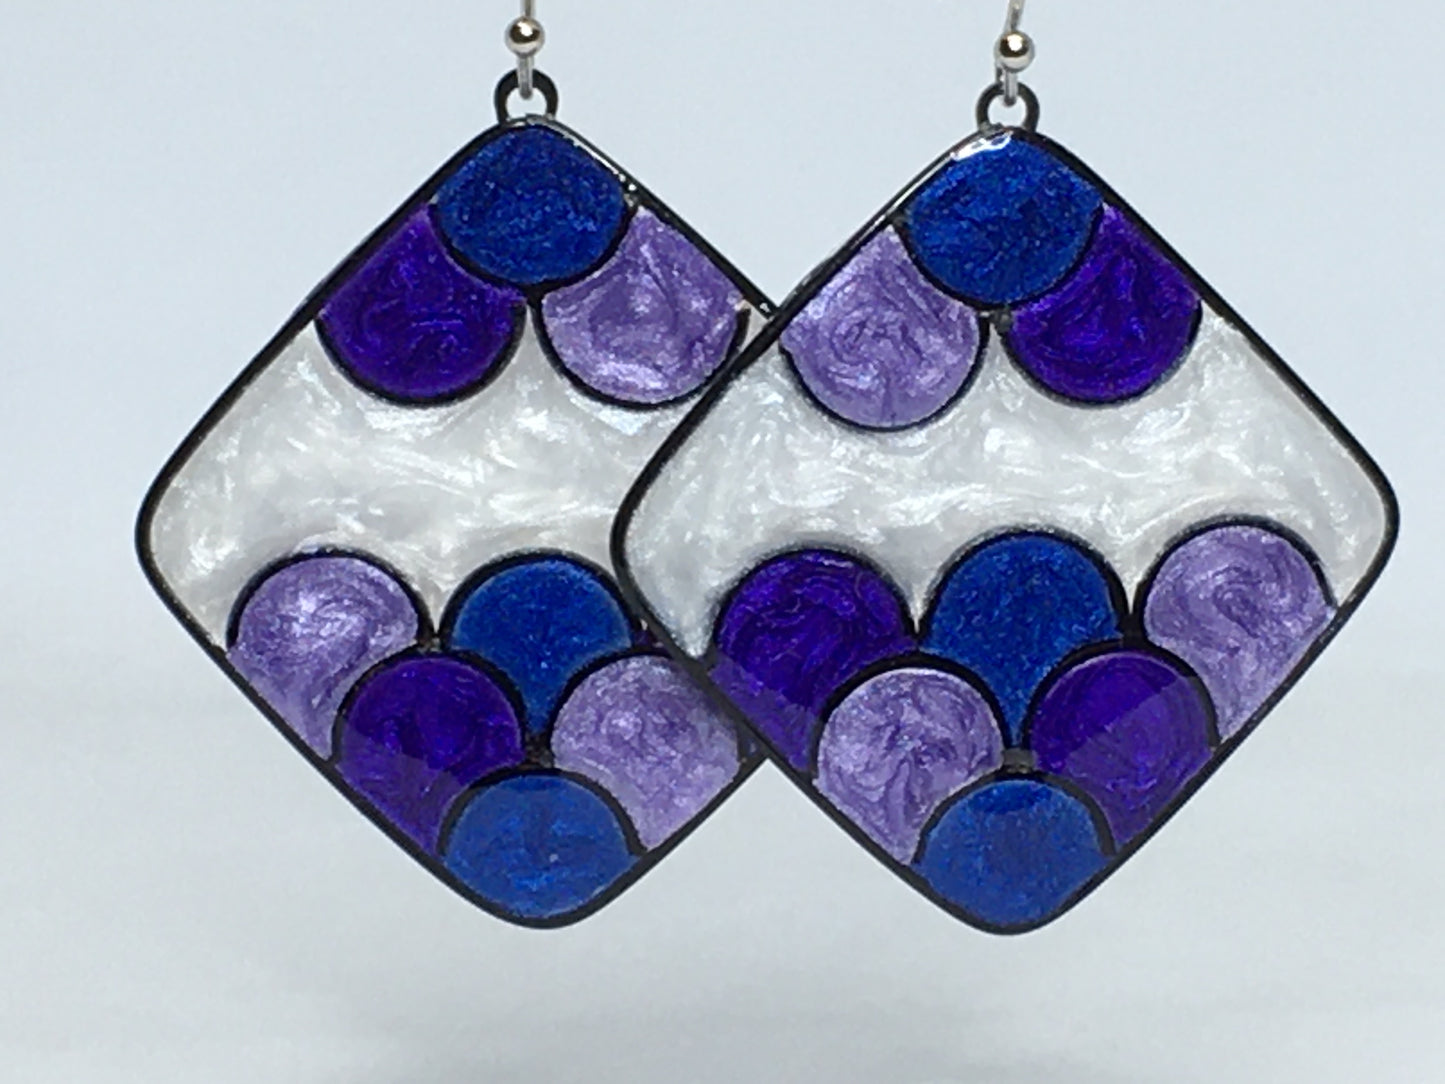 Purple, blue and white earrings